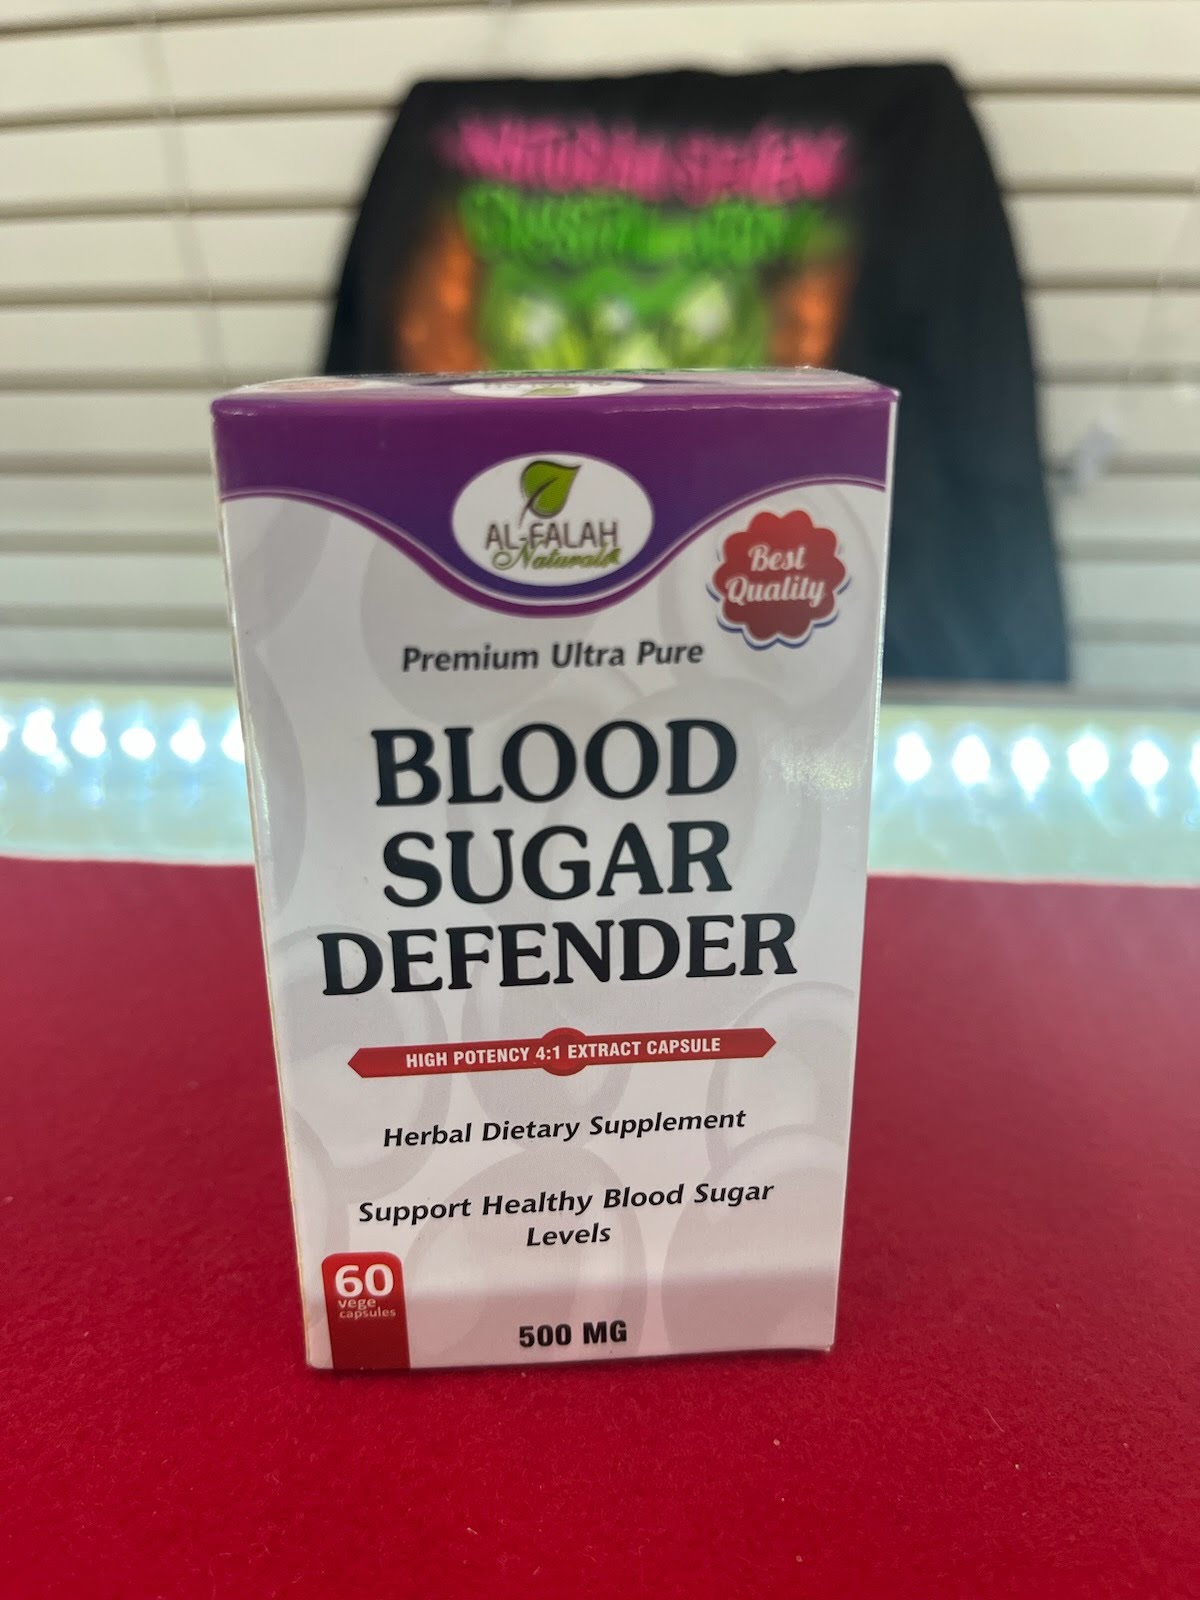 A box of blood sugar defender is sitting on the table.